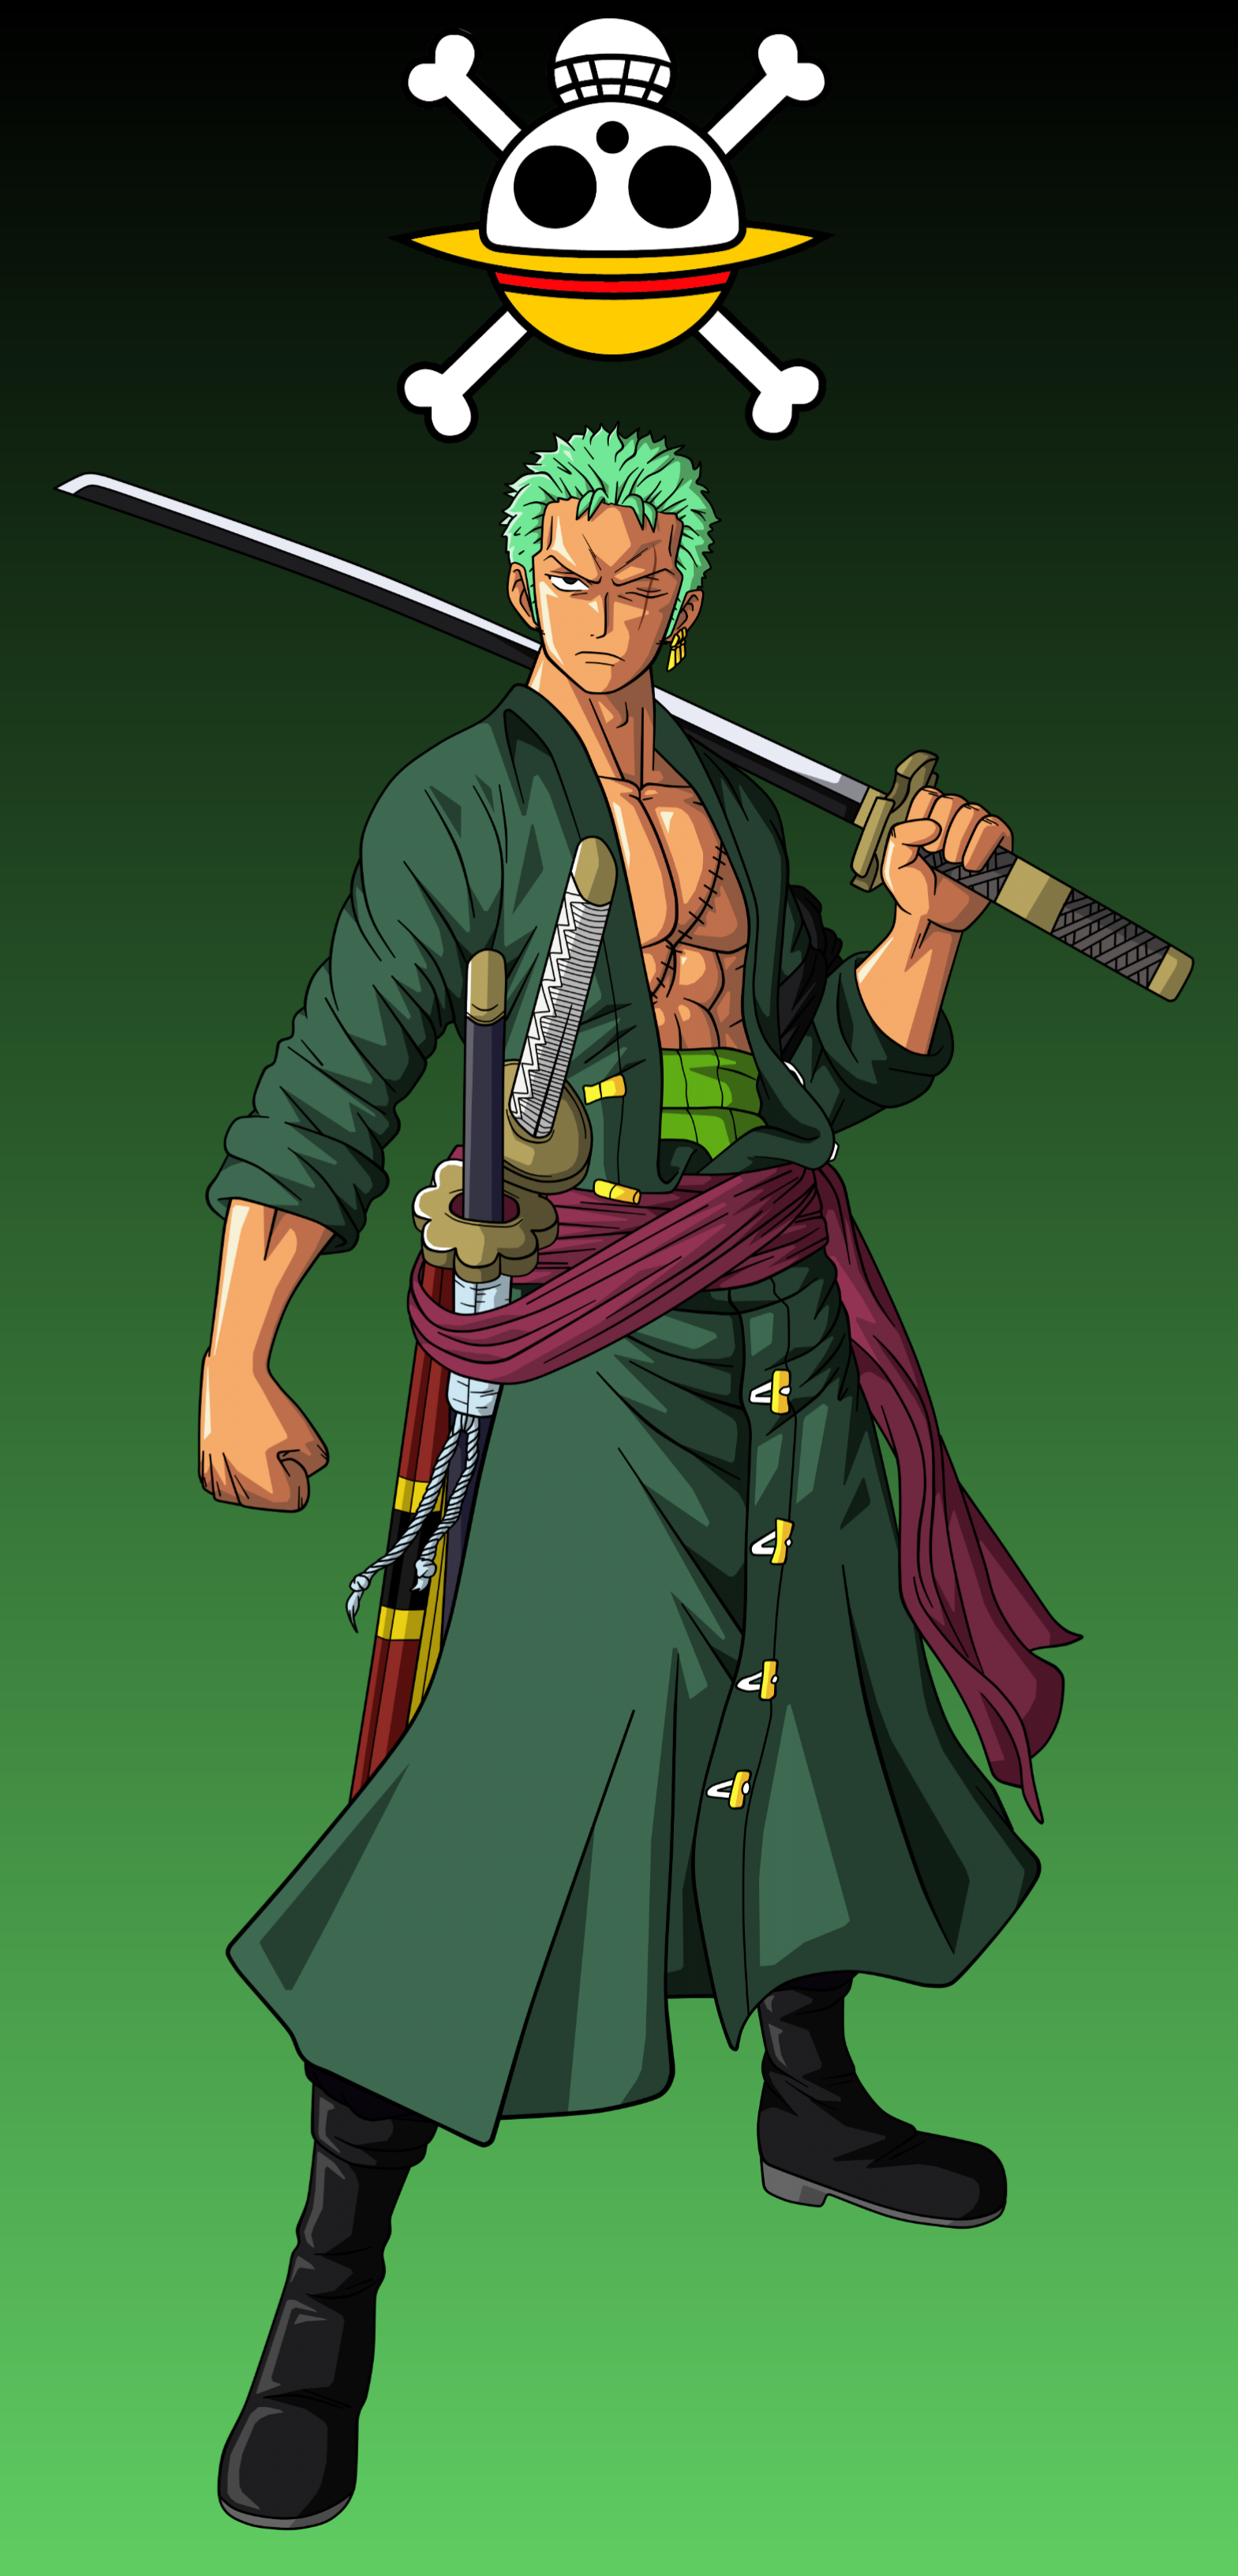 Zoro(One Piece) wallpaper for Pocophone F1 or any phone that have notch ...